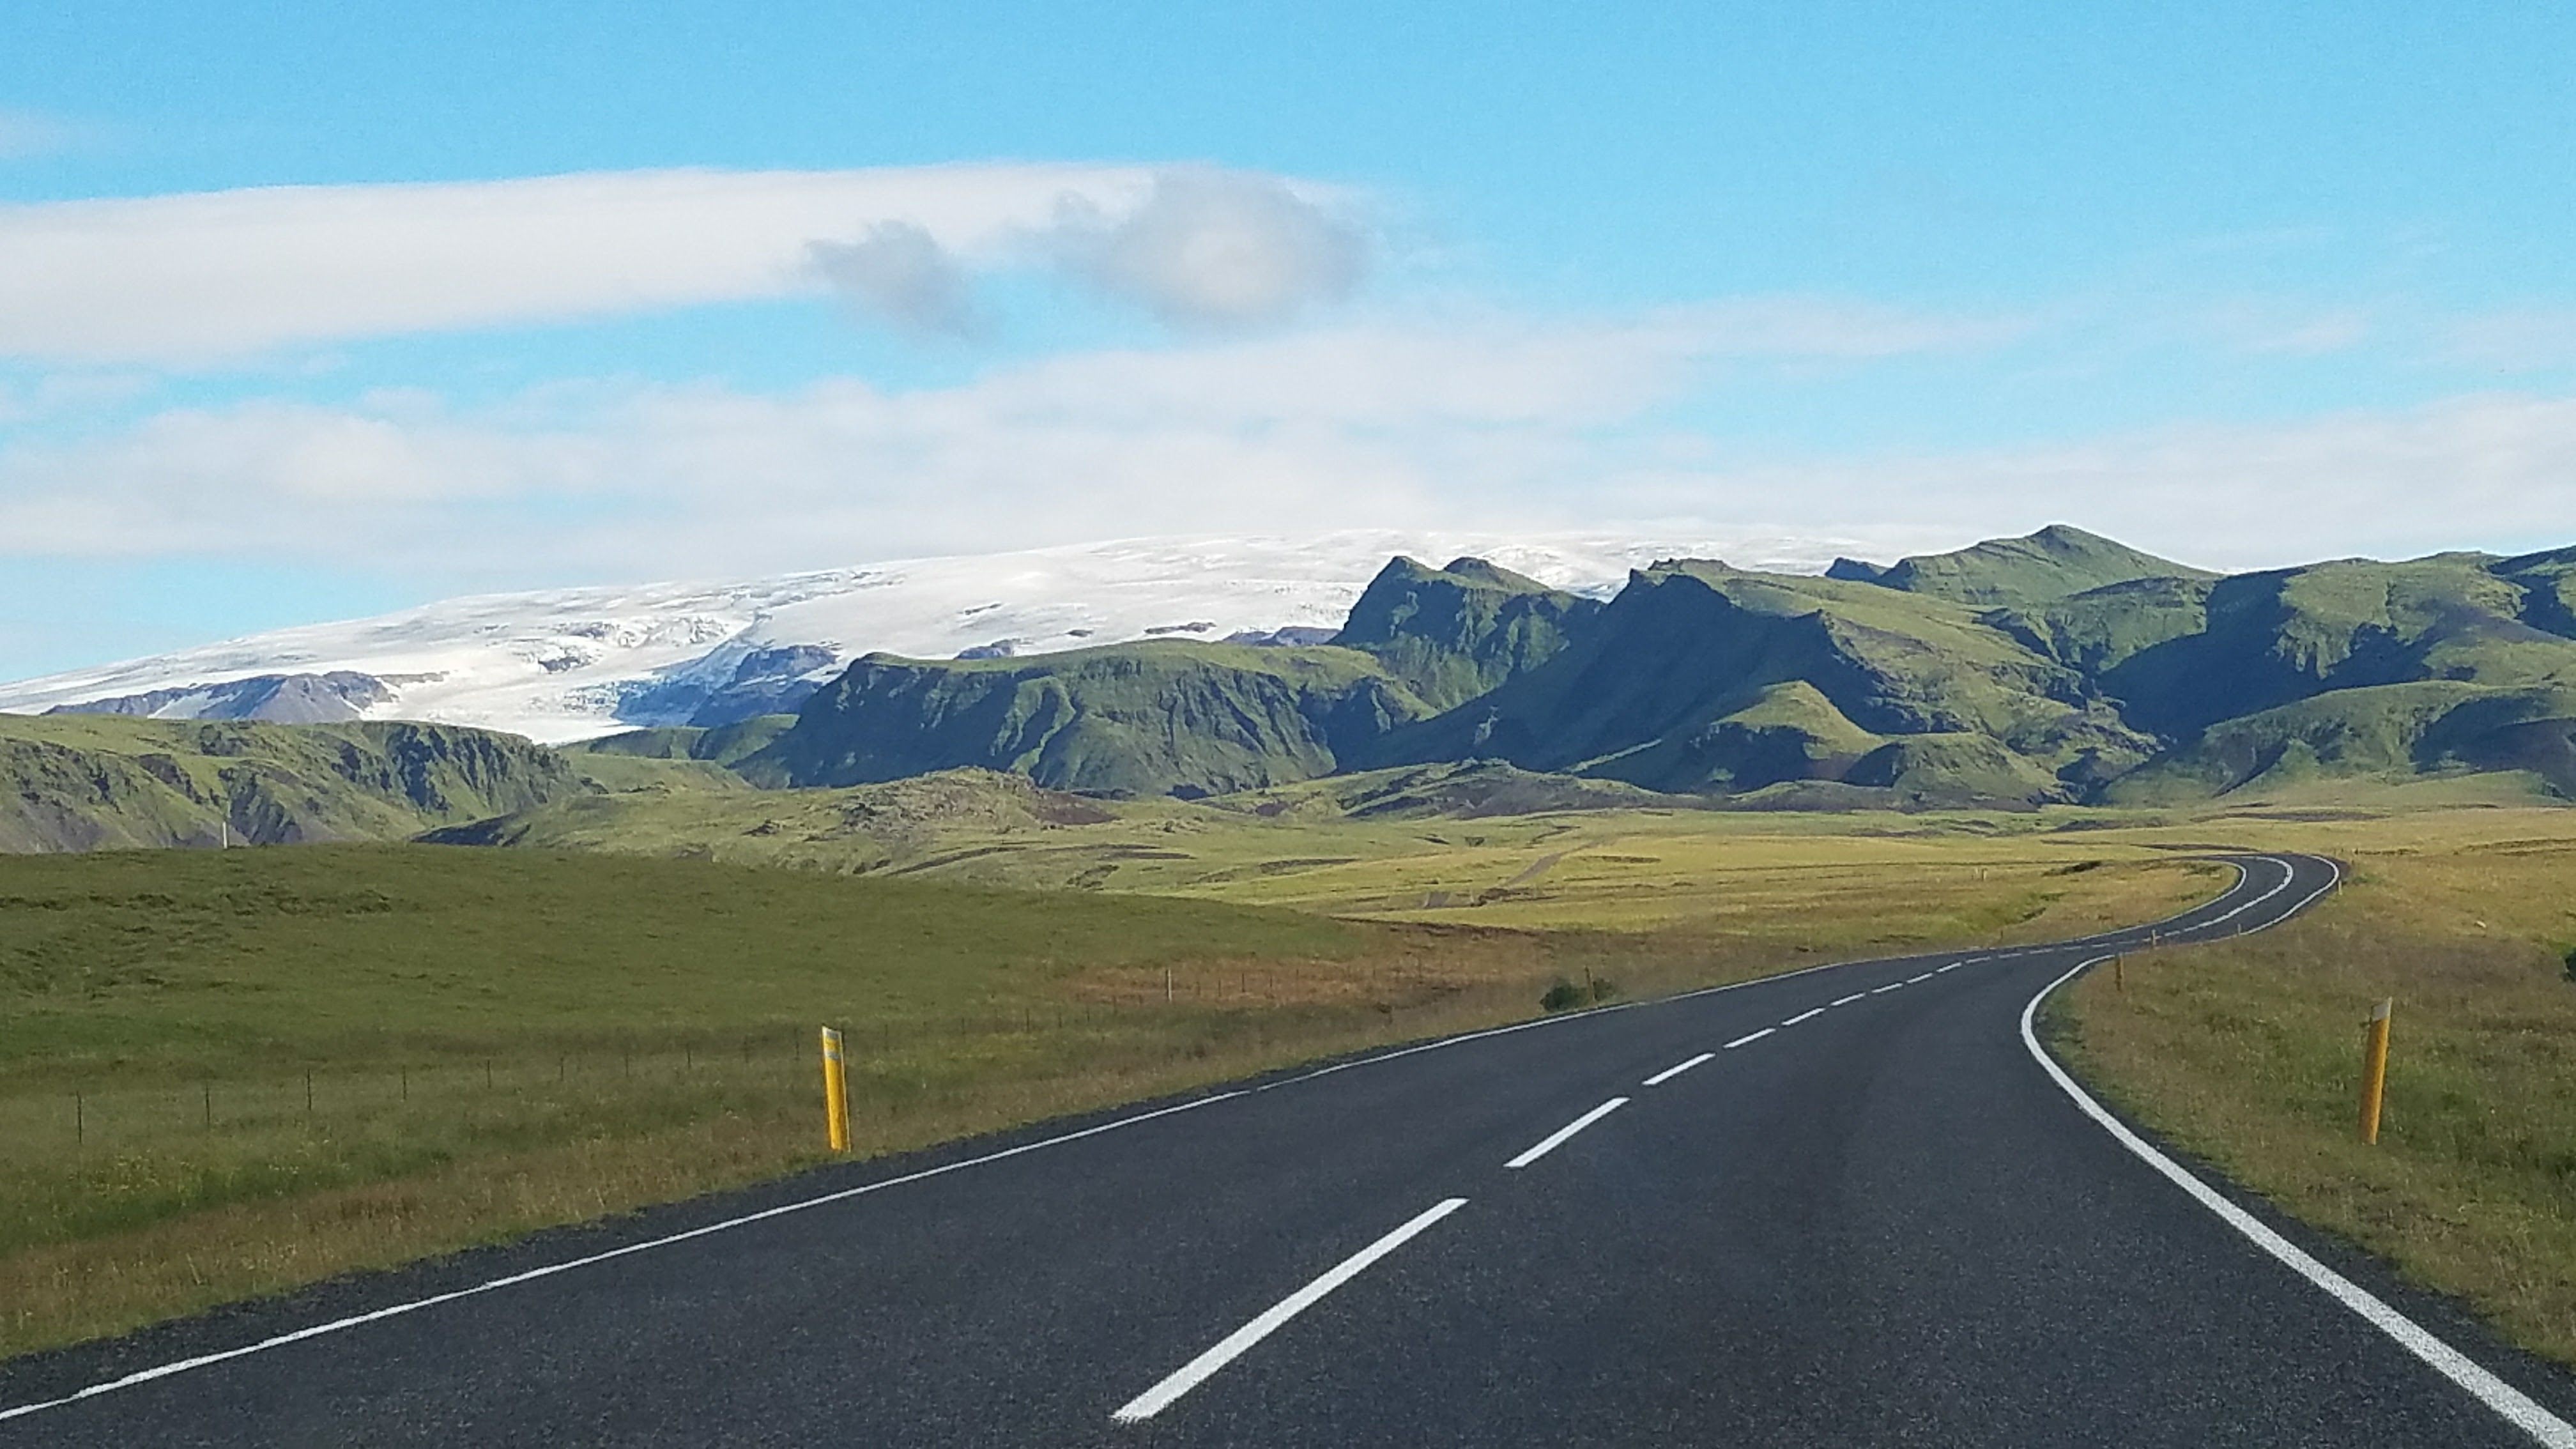 A photograph of a road in Iceland. The road stretched off into rolling green hills. A glacier can be seen in the distance